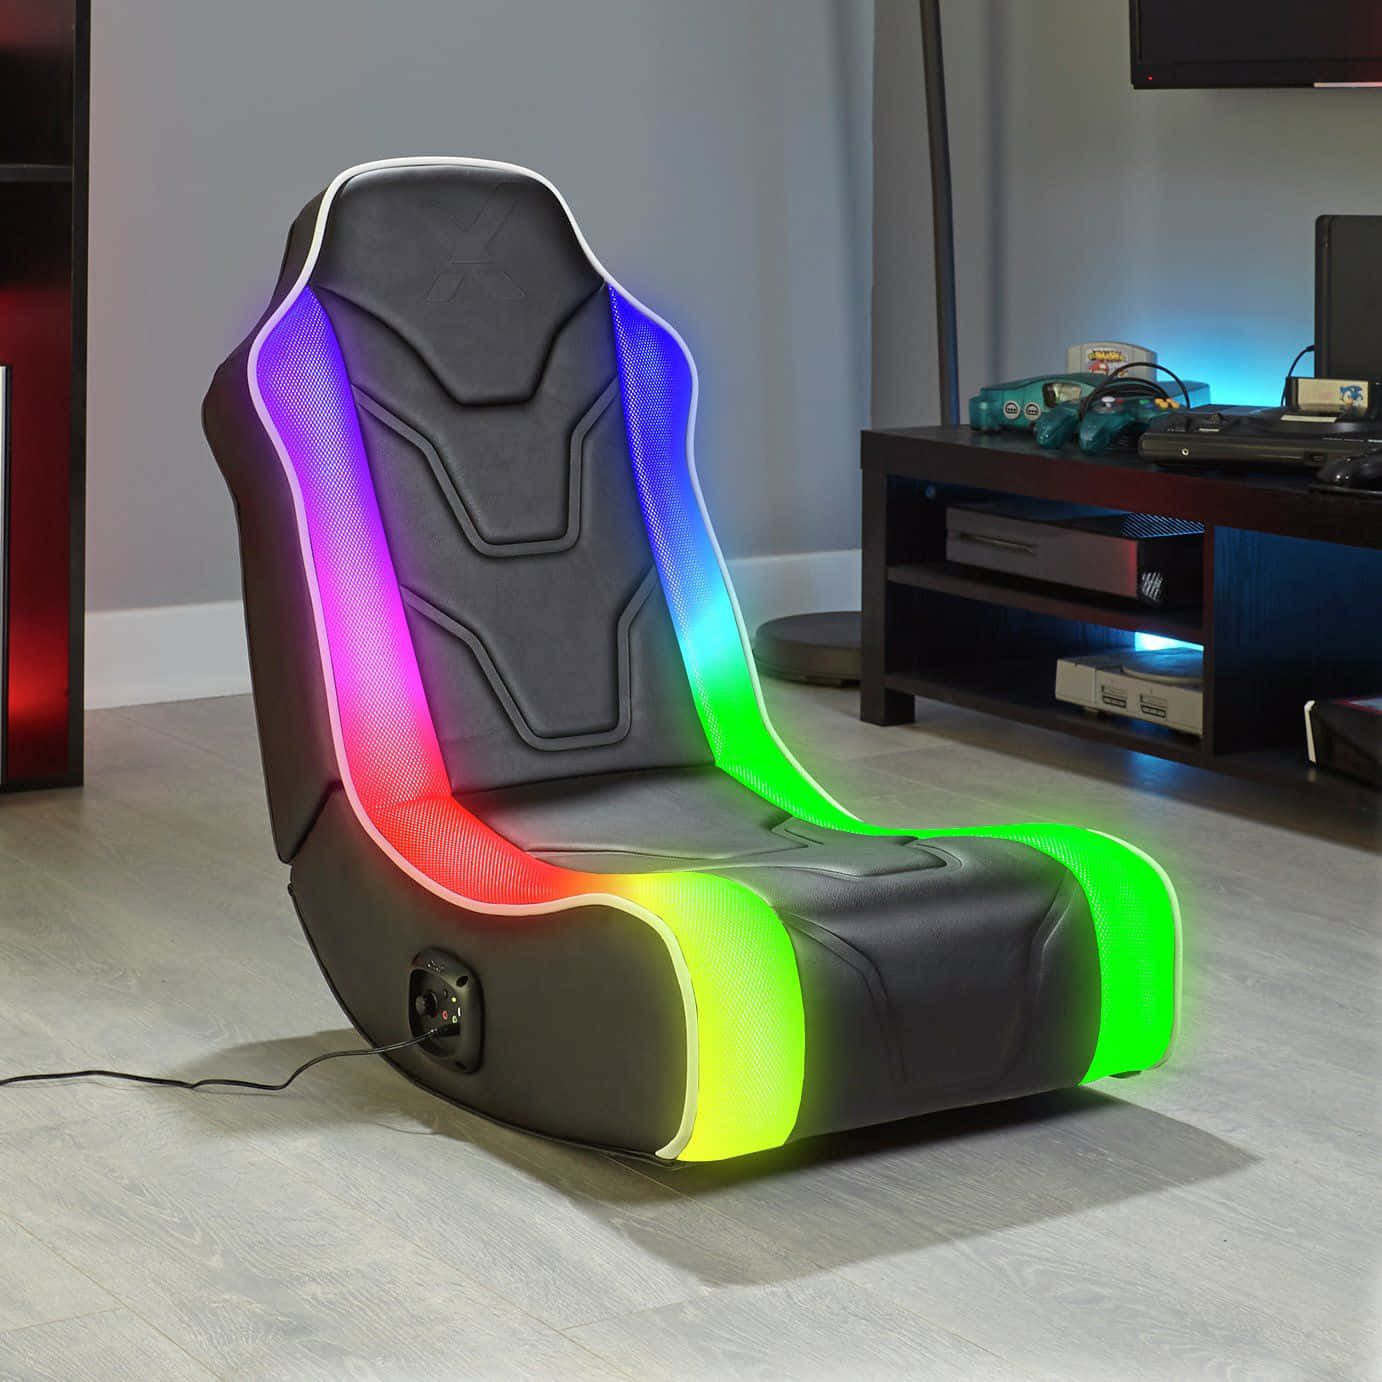 Kick Back and Relax in Ergonomic Comfort with a Gaming Chair Wallpaper